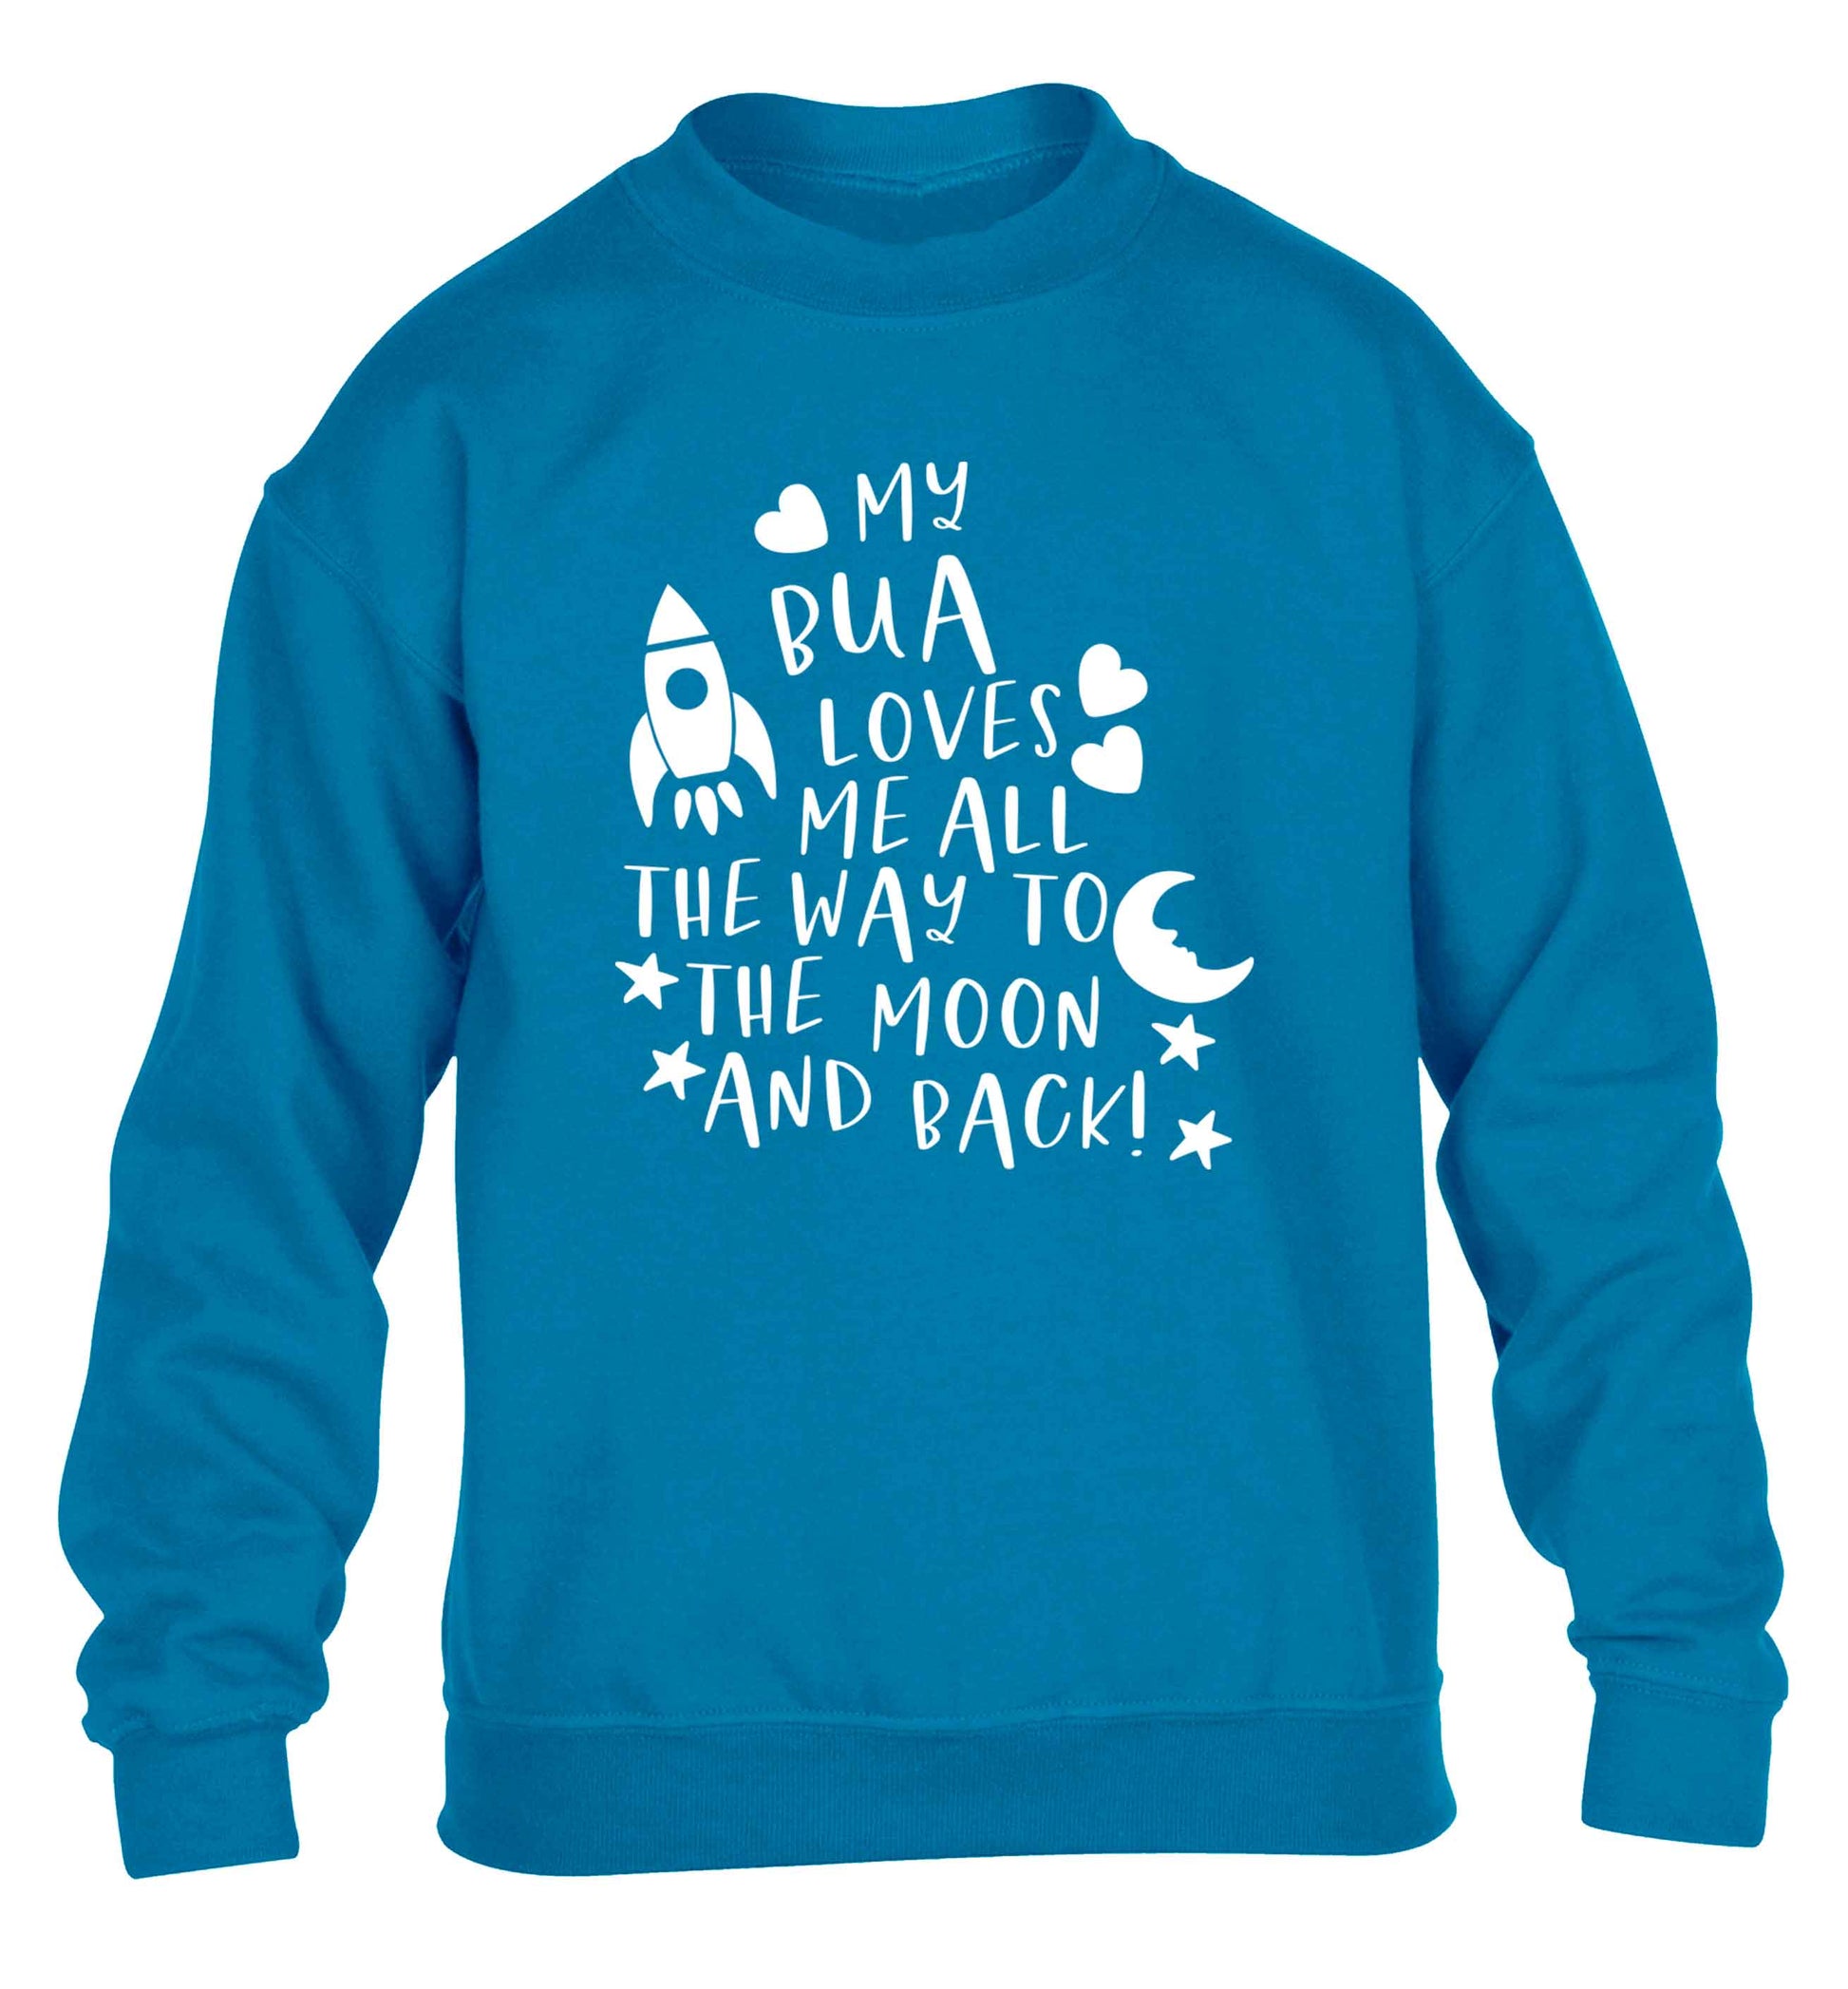 My bua loves me all they way to the moon and back children's blue sweater 12-13 Years